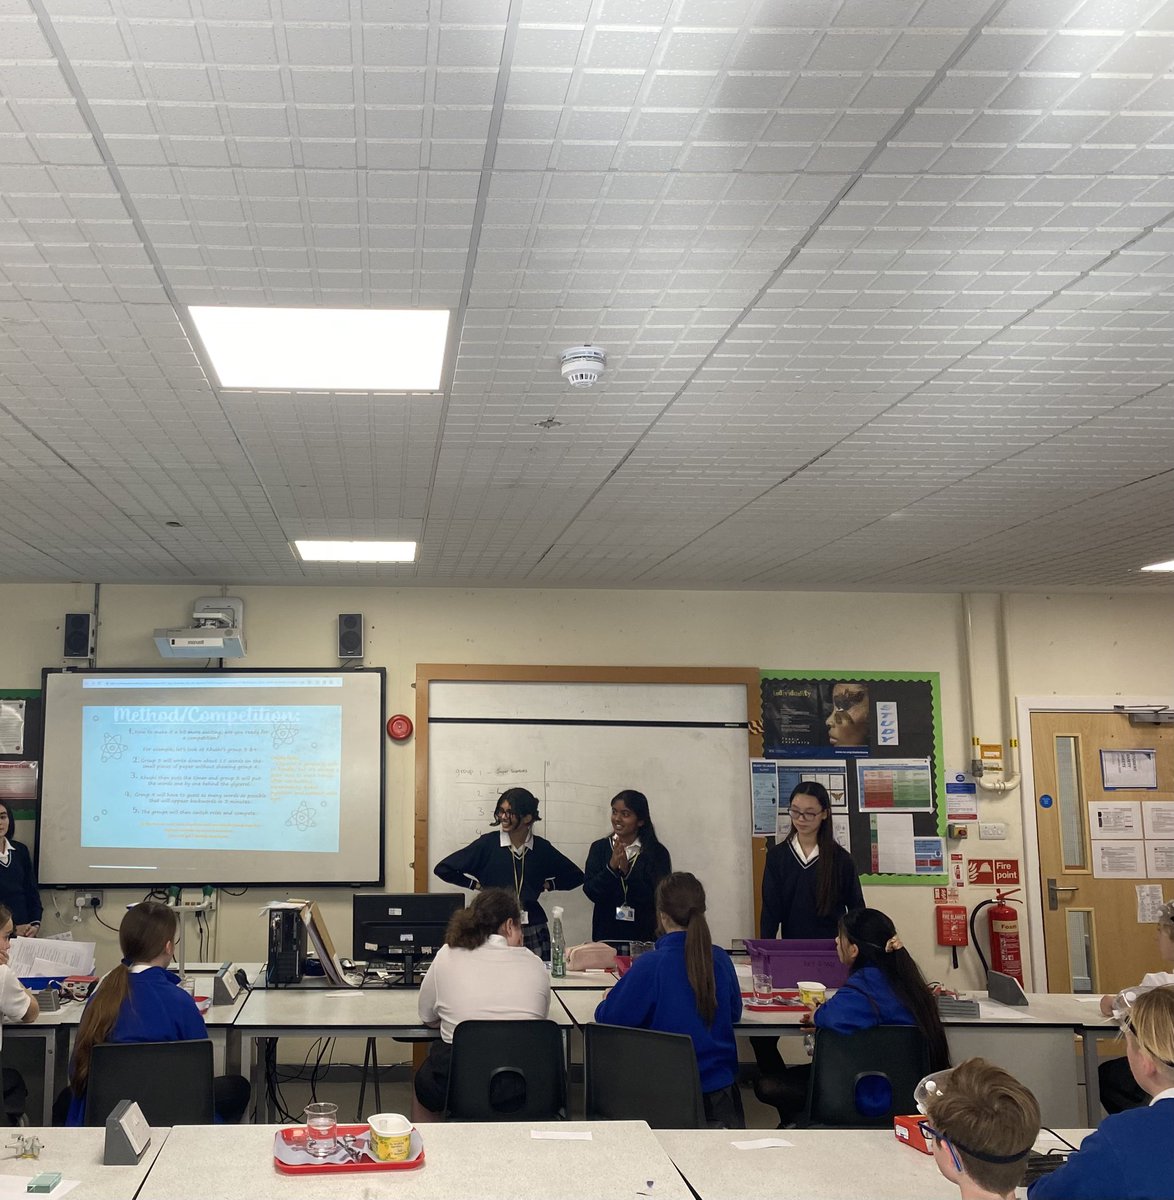 Pupils from @HawesDown @BeckenhamLpps & Clare House experiencing Science @LPGSBromley huge thanks to our students for planning/delivering such engaging practical activities, our Science technicians for their support & to Mrs Parry-Trust Curriculum Strategy Lead for organising!